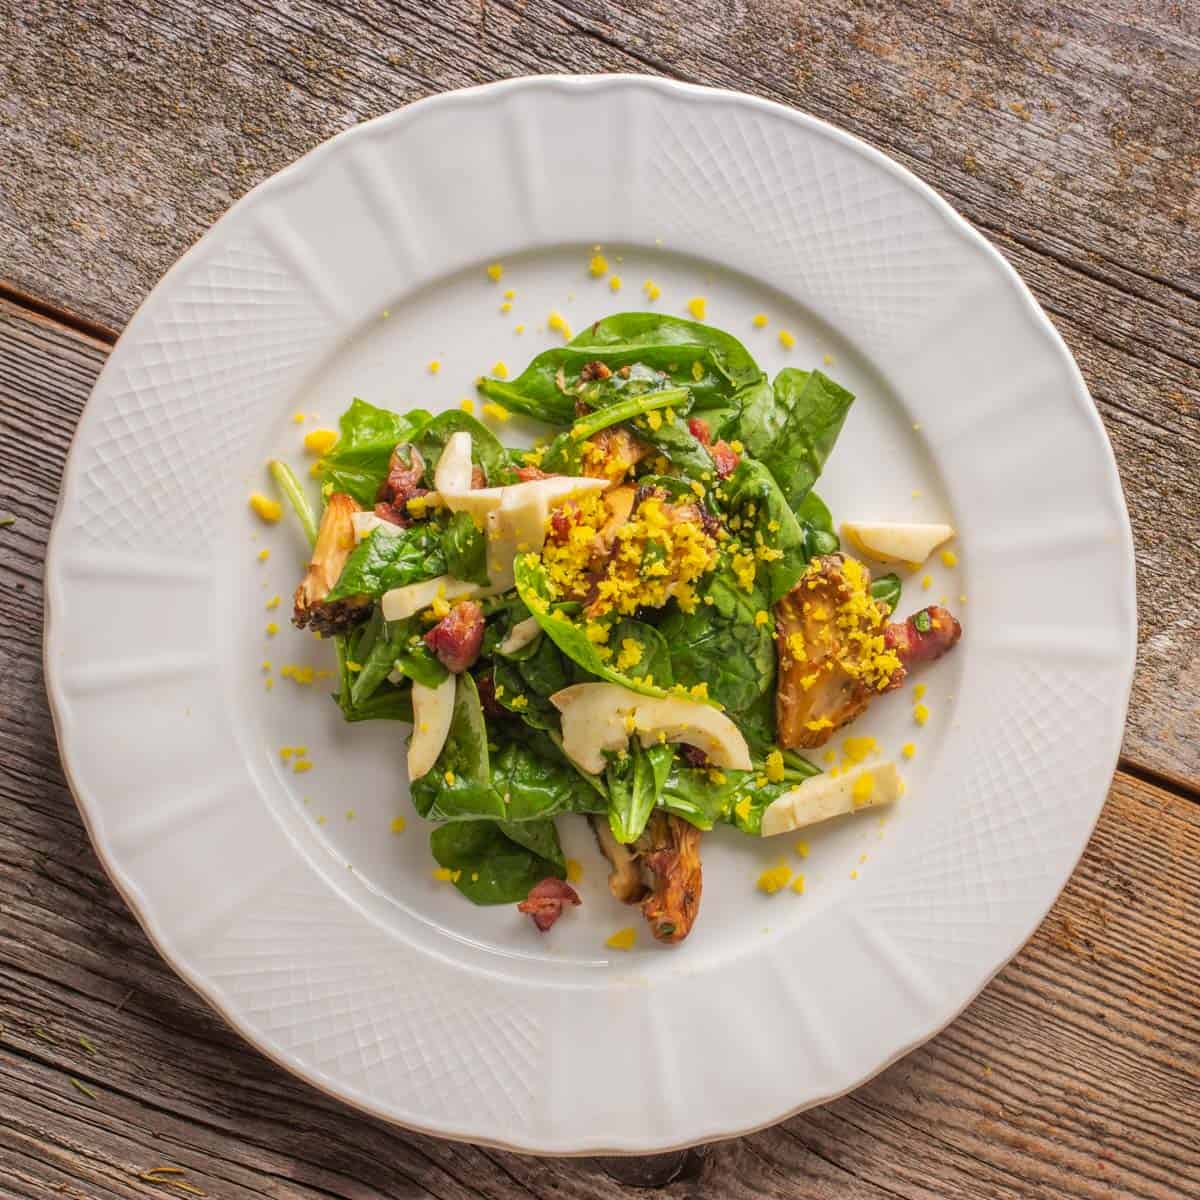 Spinach mushroom salad with bacon and grated egg yolk on a plate